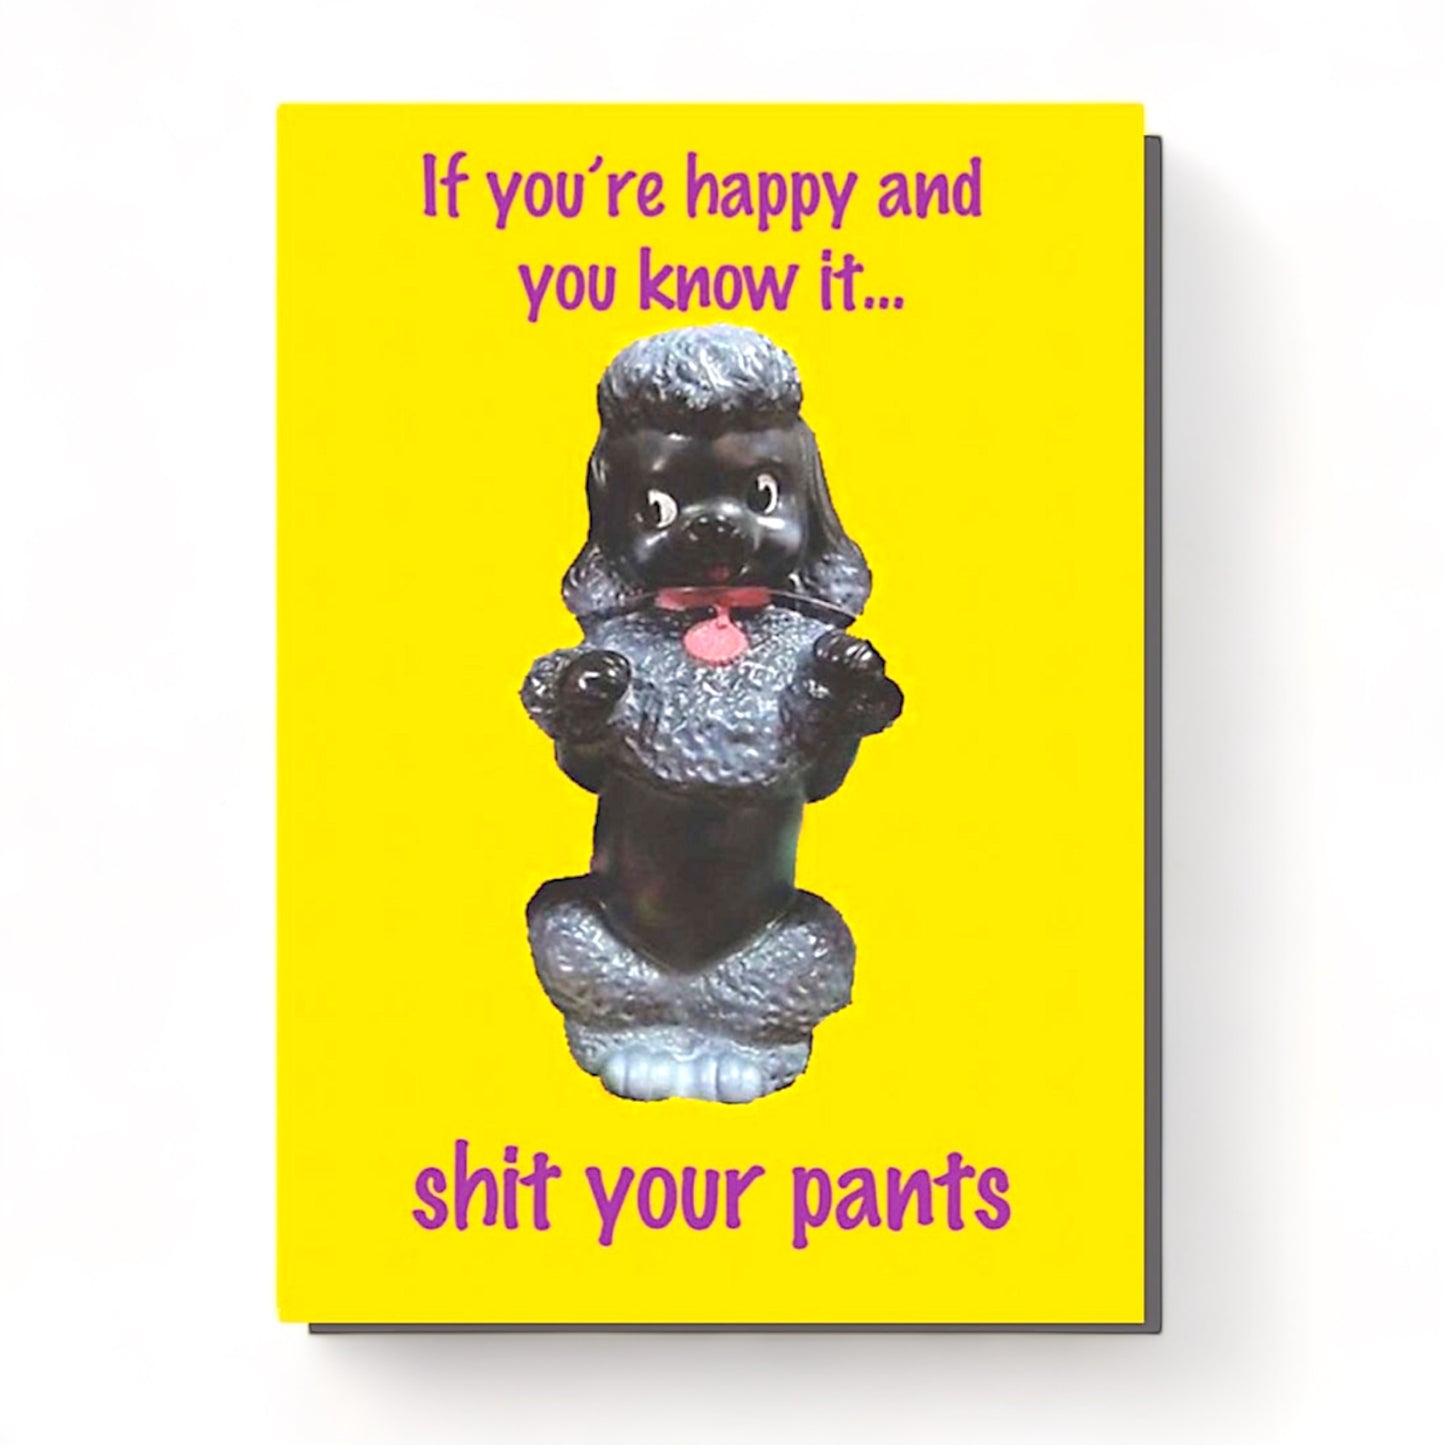 If You’re Happy and You Know It - Greeting Card